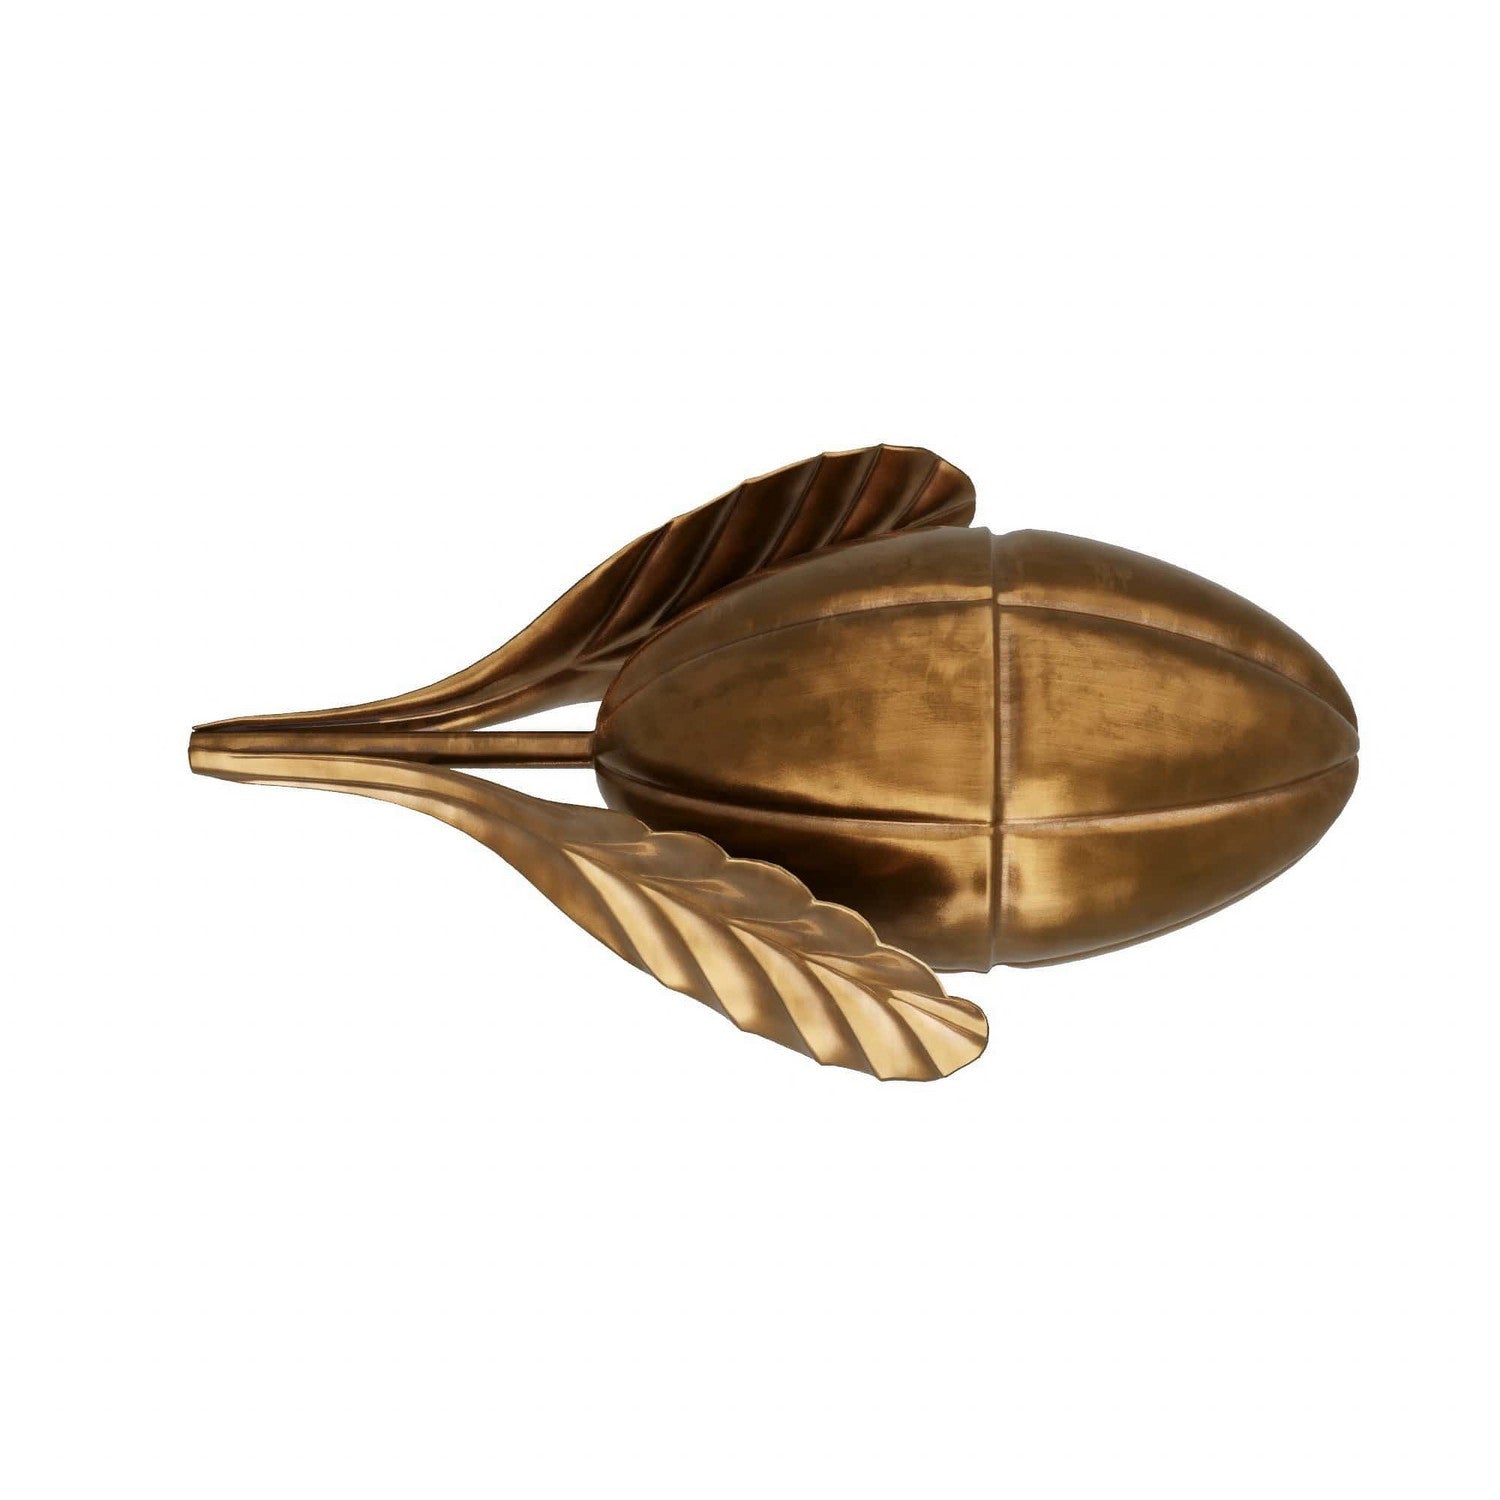 Sculpture from the Pitaya collection in Vintage Brass finish